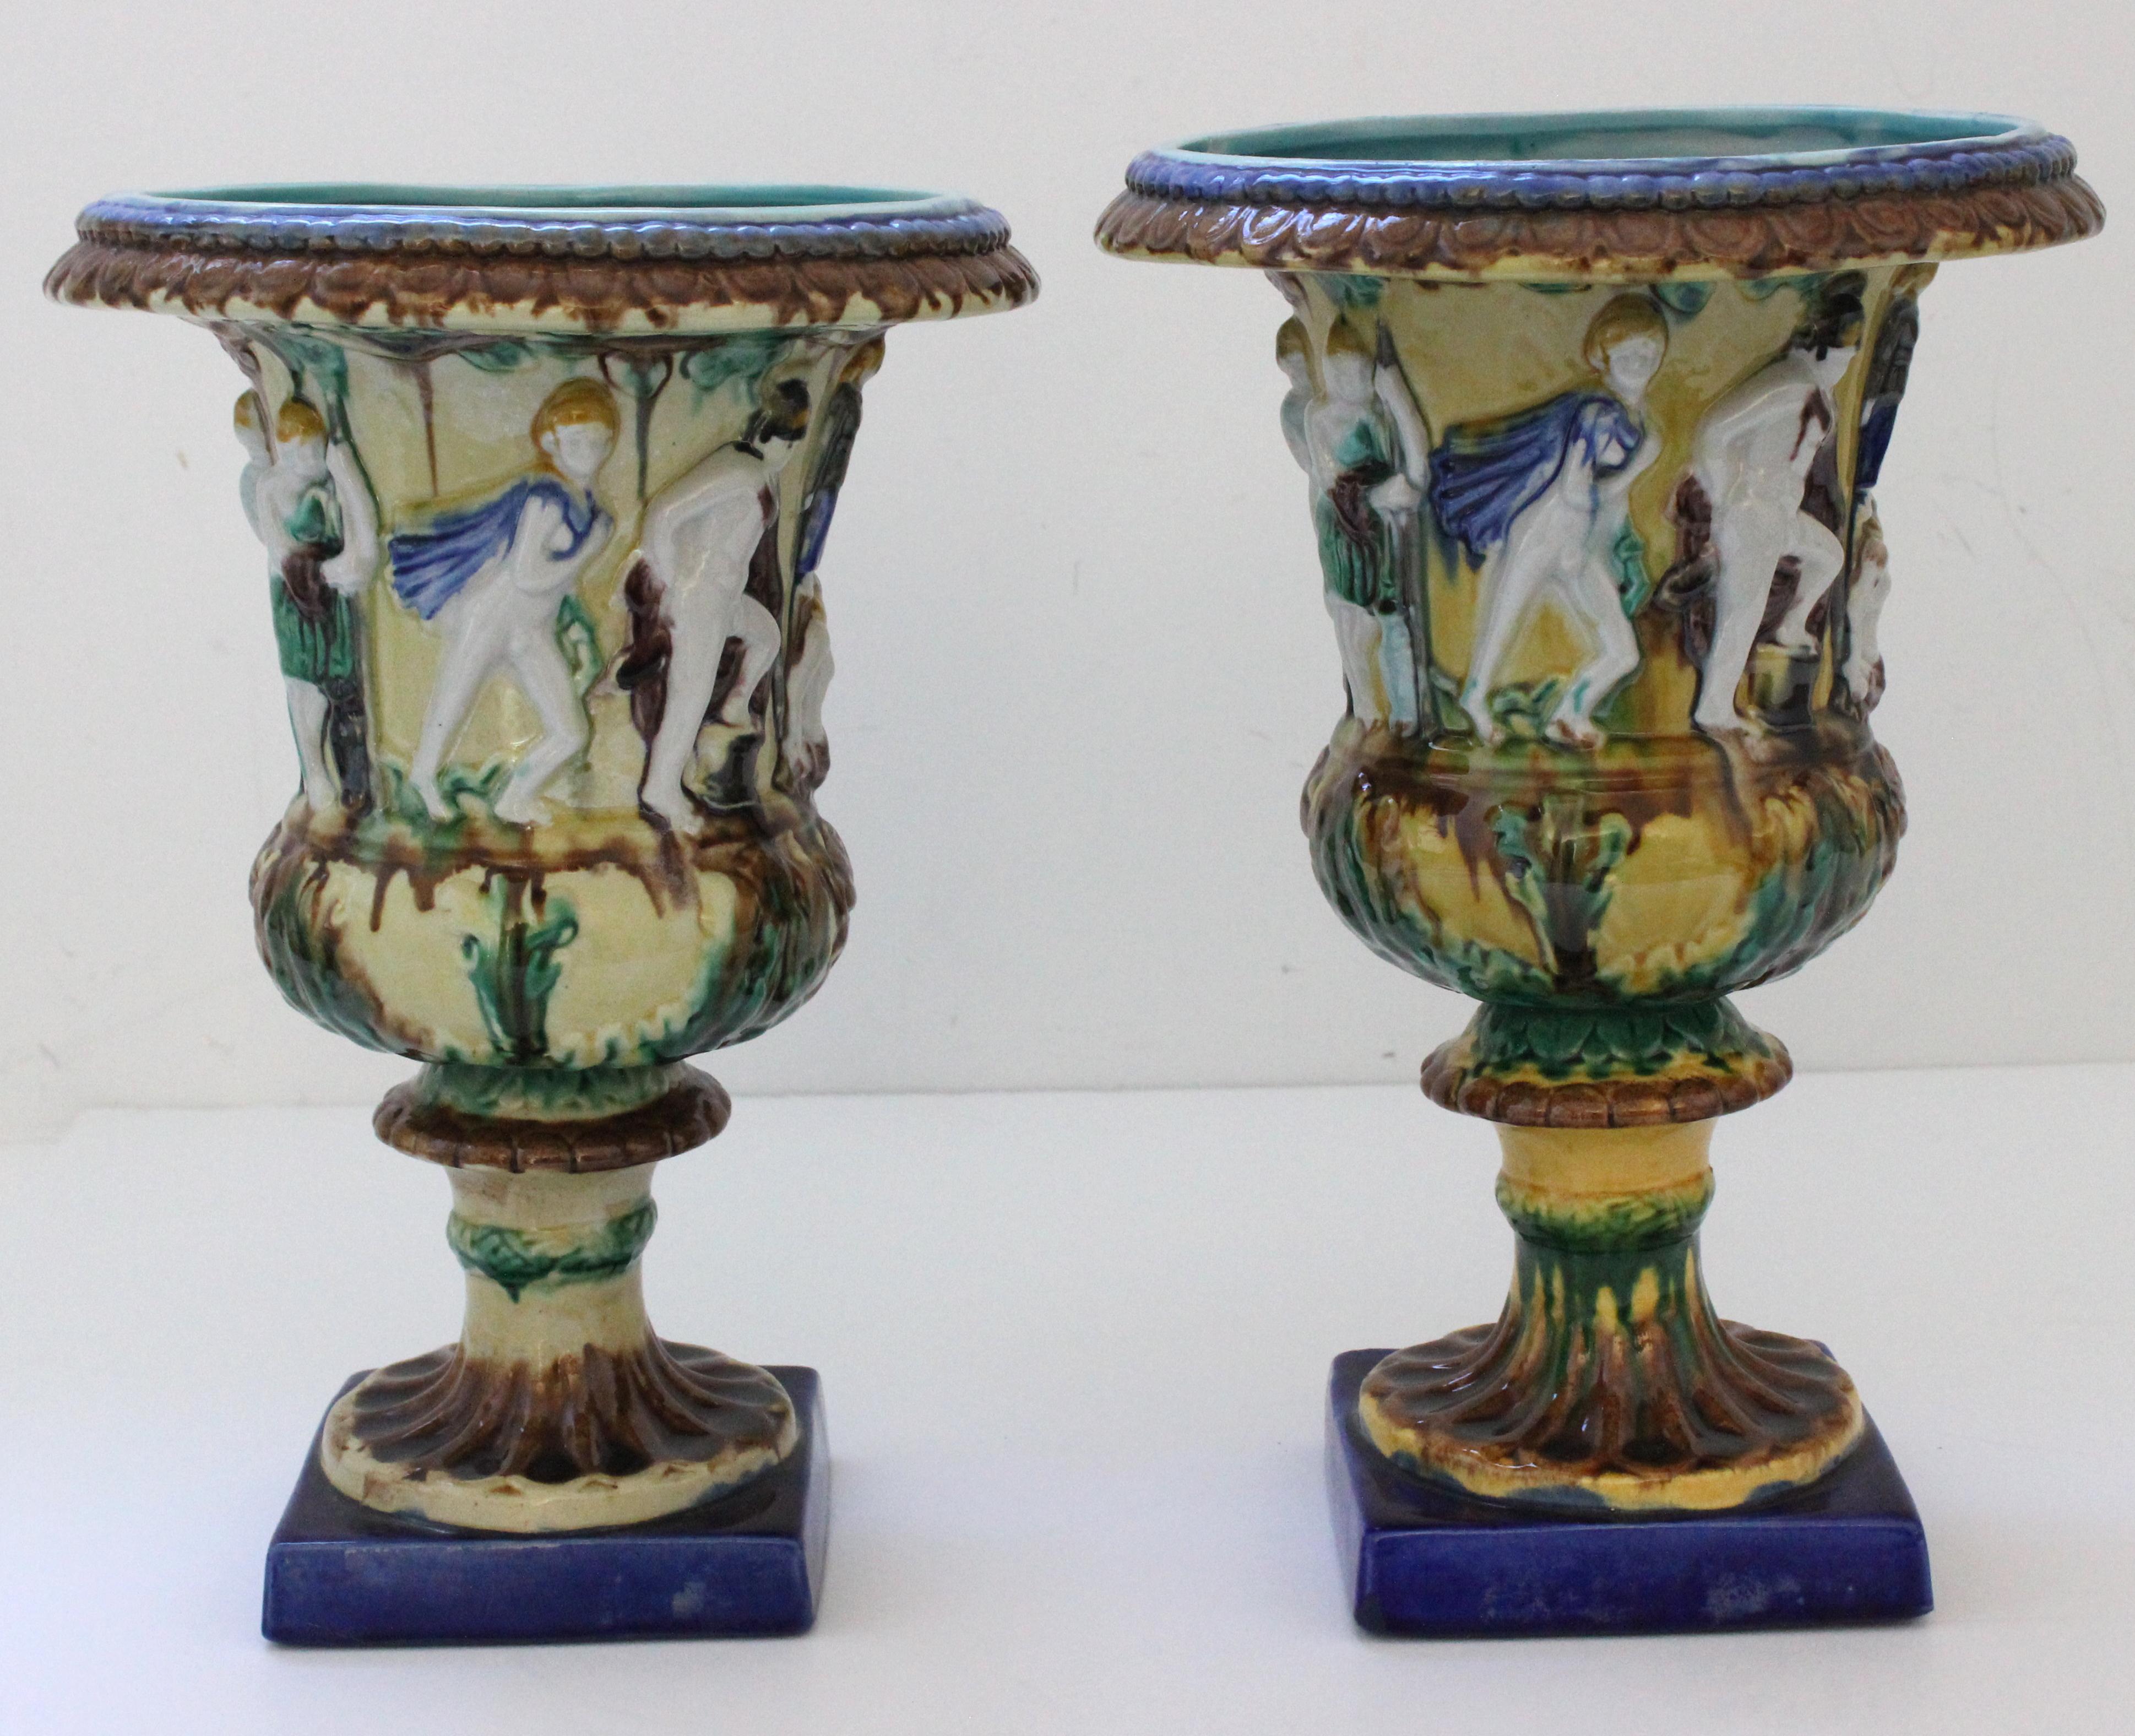 Neoclassical Revival Pair of English Majolica Urns For Sale